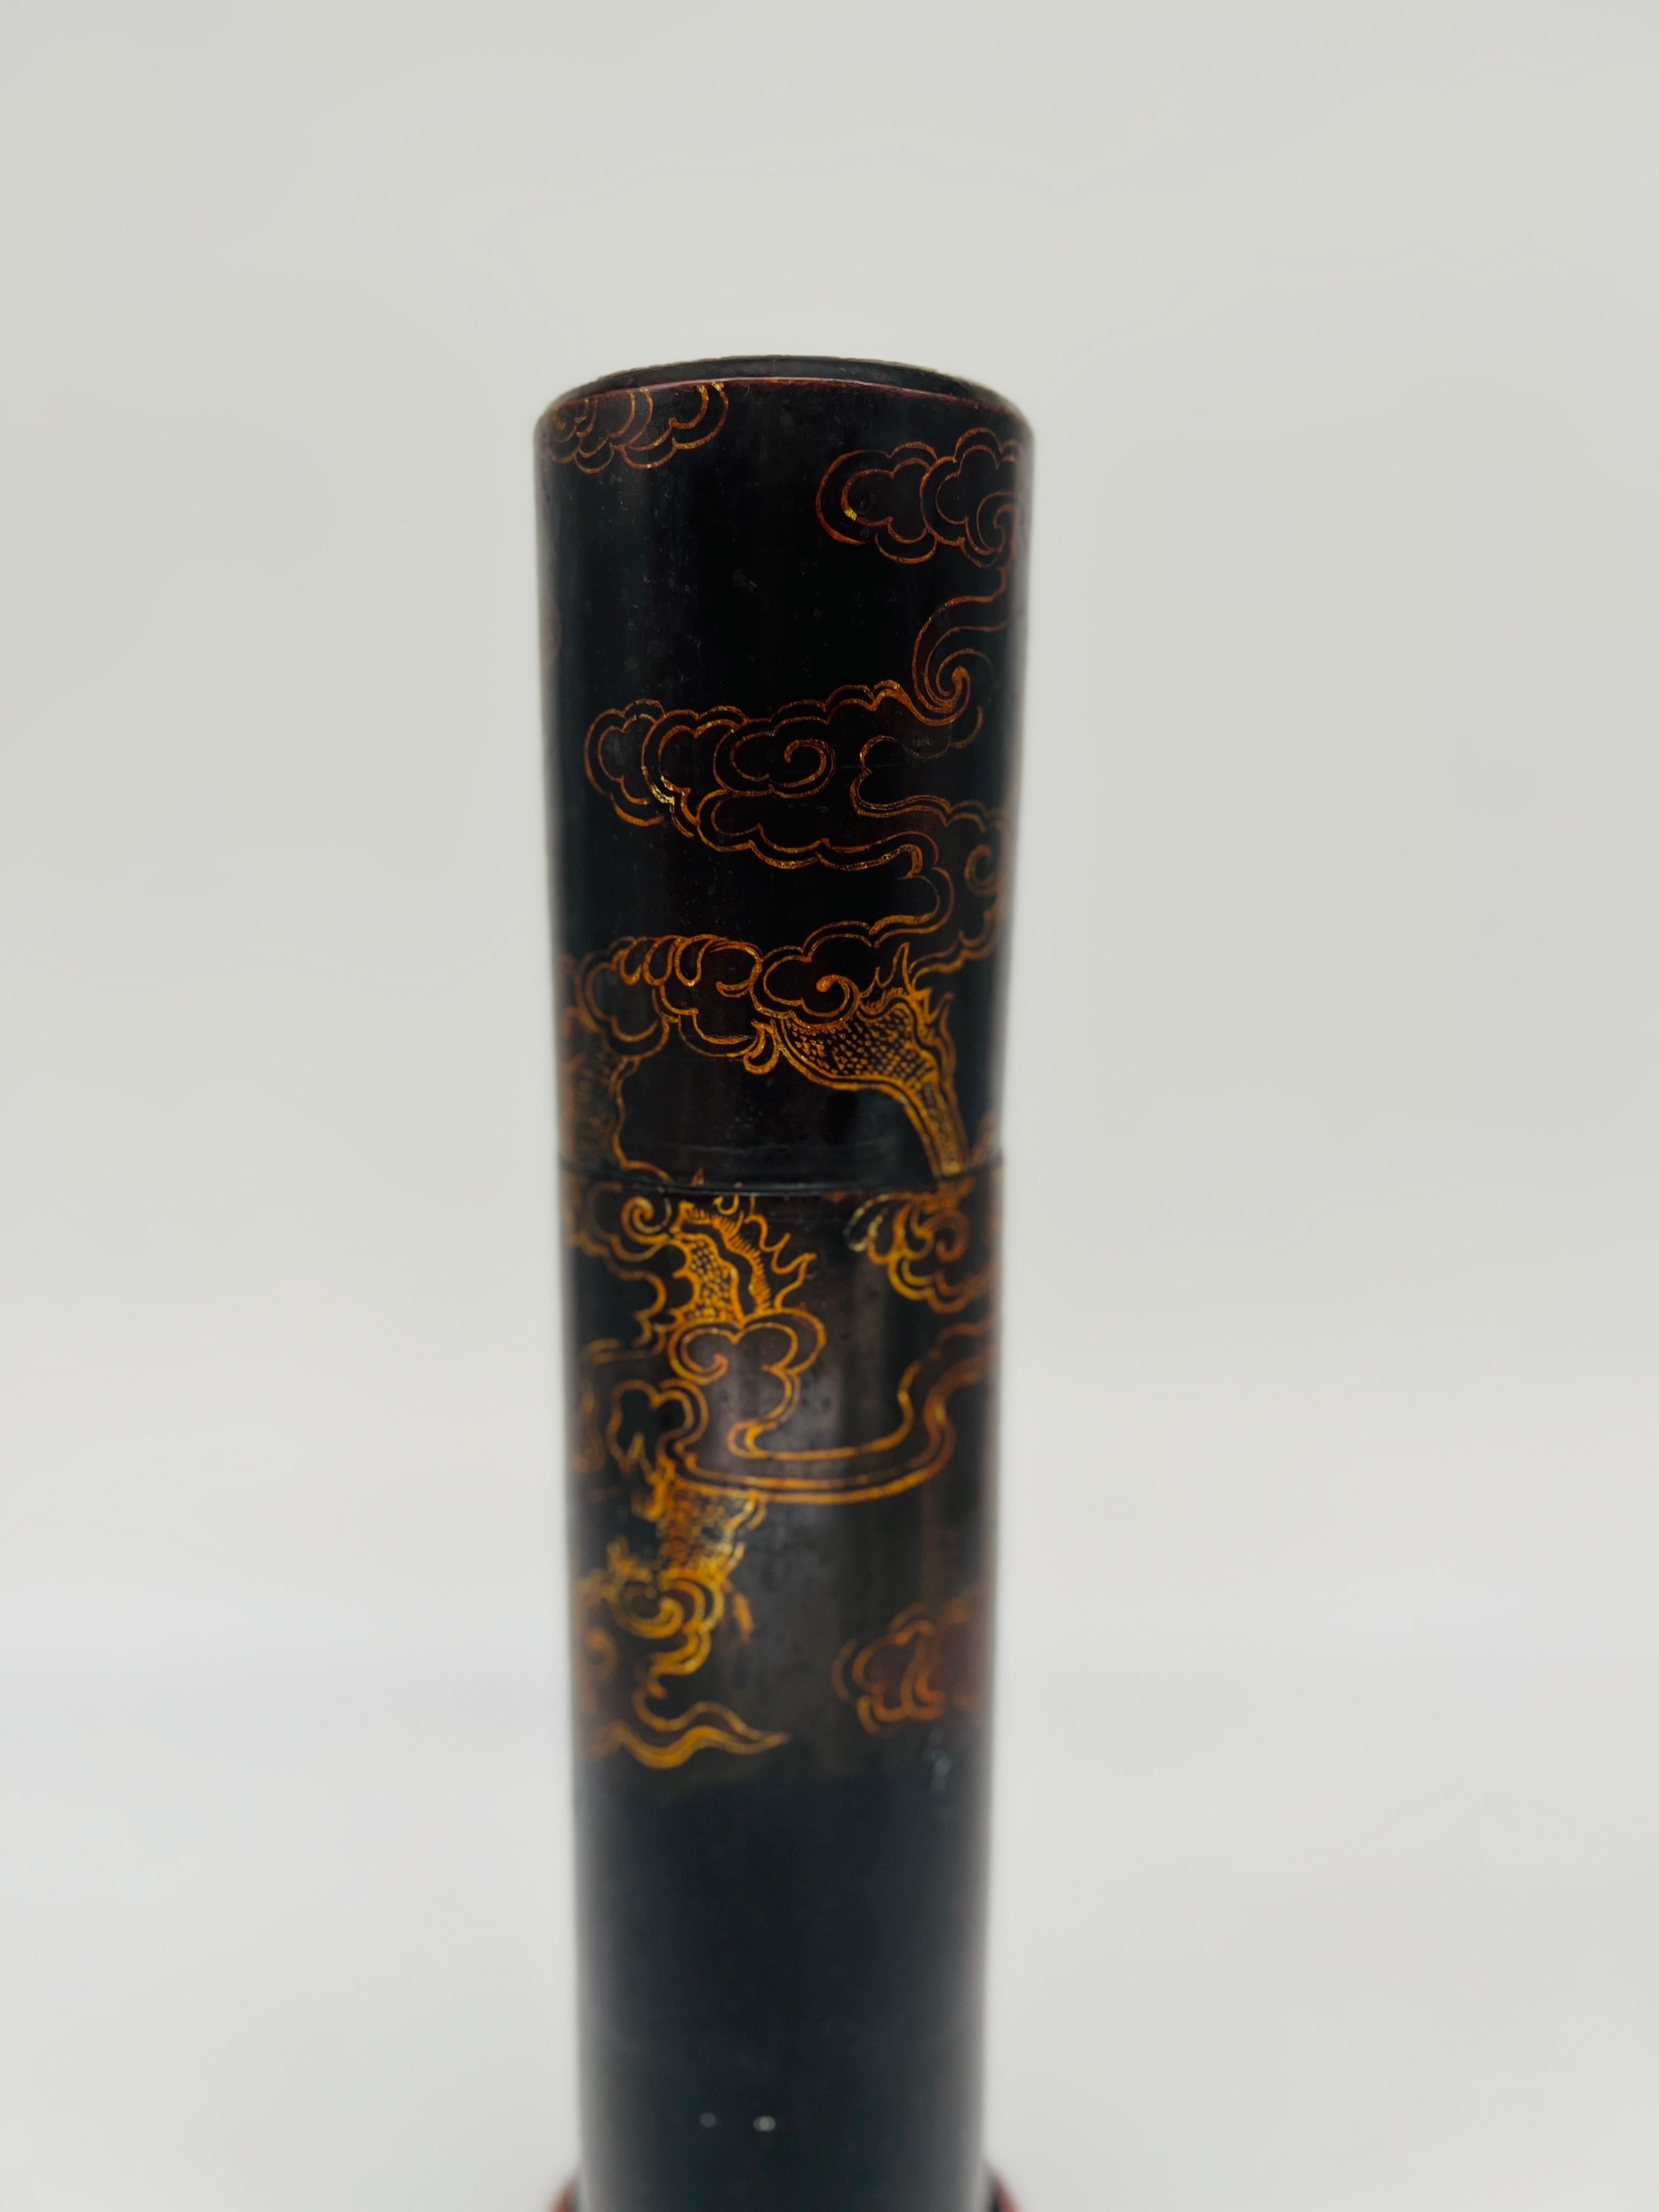 Vintage Japanese Lacquerware Cylindrical Fireplace Matchstrike Box For Sale 3